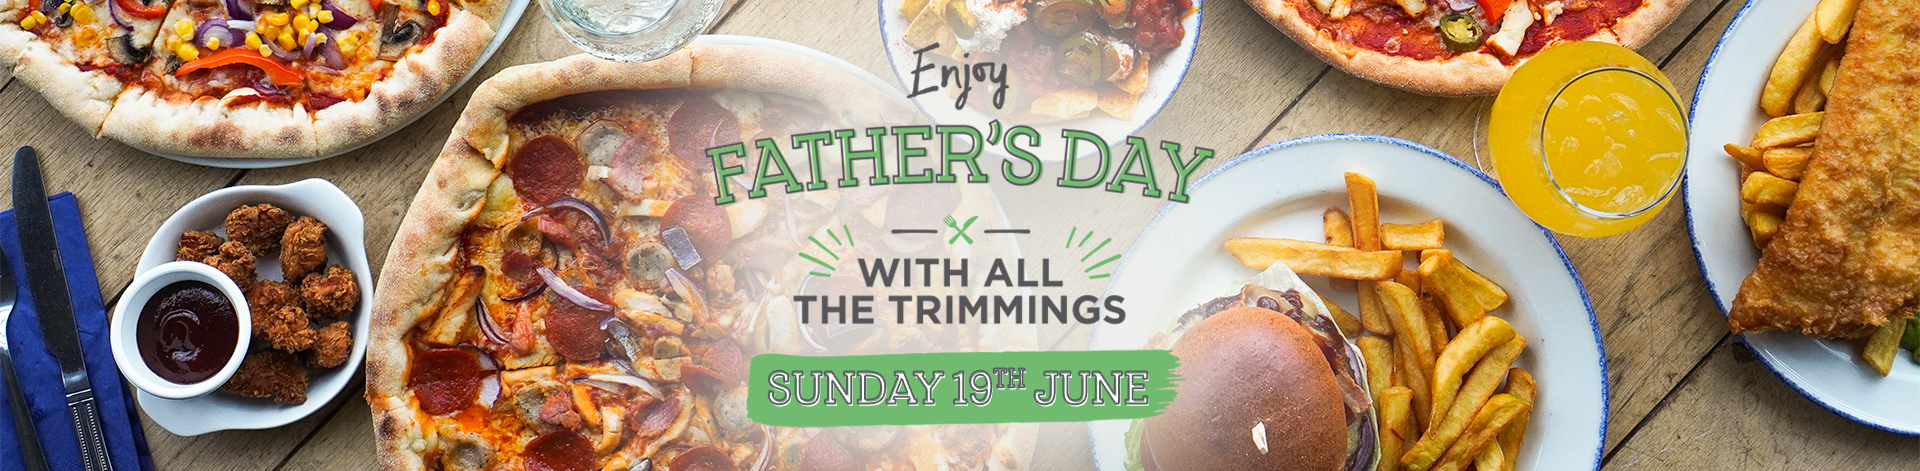 Fathers Day at The Young Vanish Inn